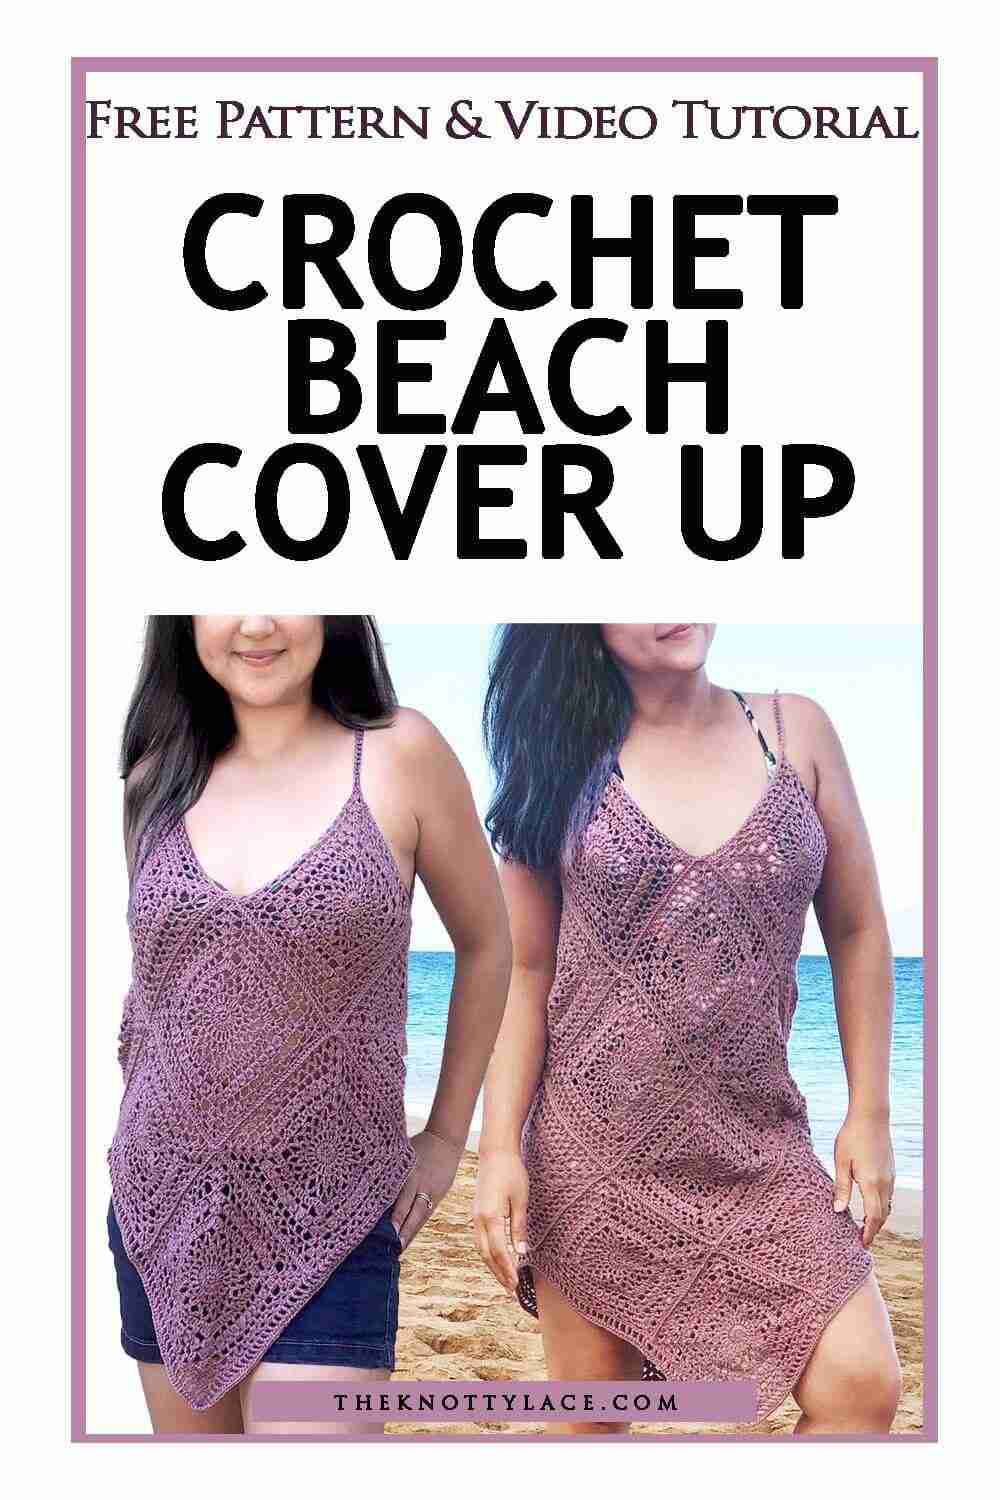 Granny Square Swimsuit Cover-up Free Crochet Pattern